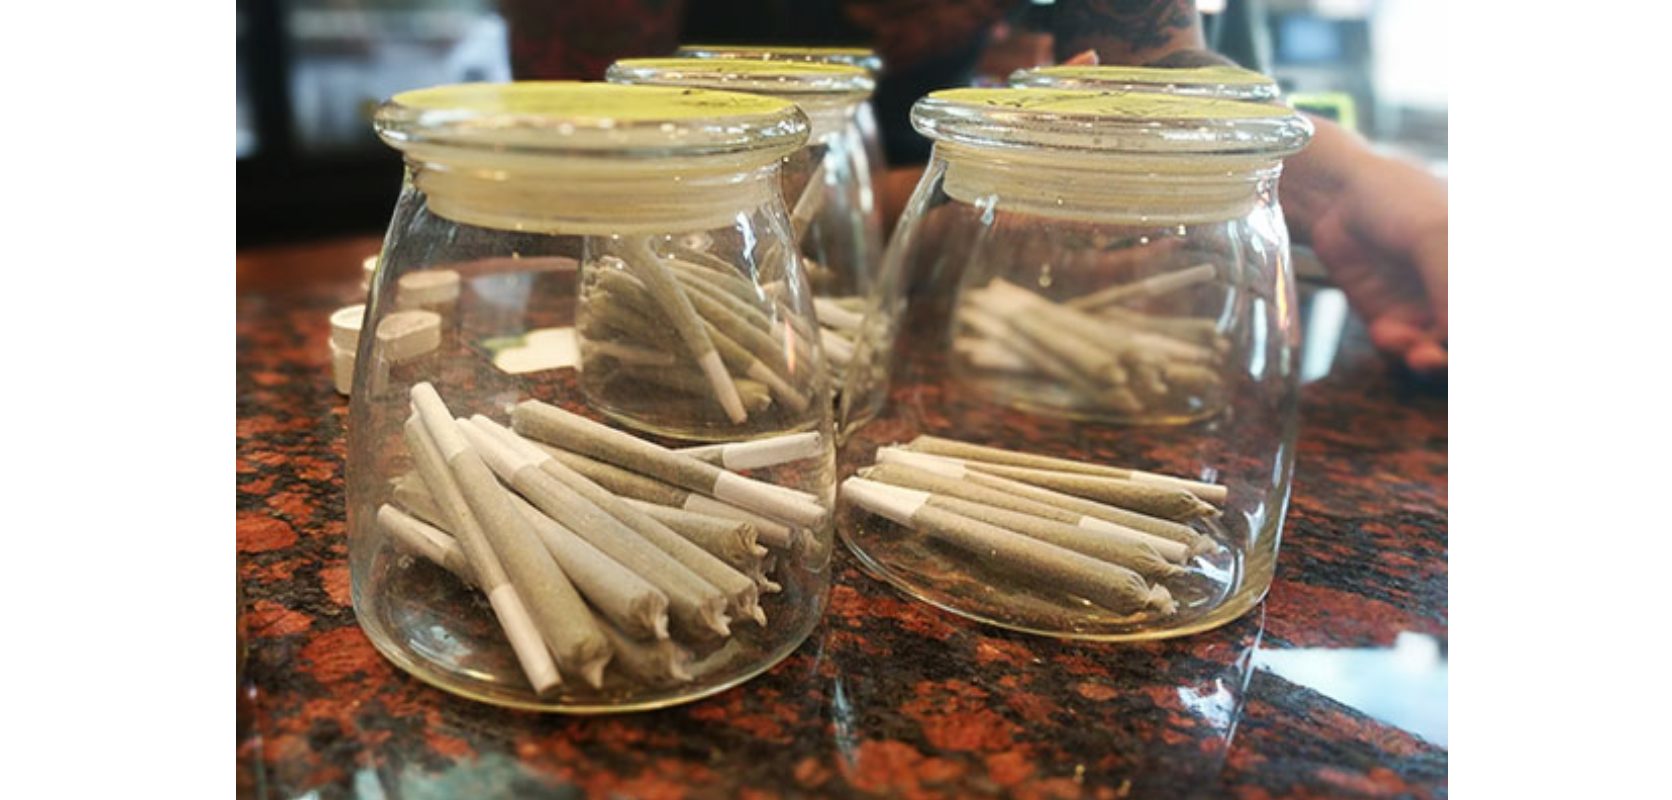 Now that you know how to properly store your precious prerolls, it’s perhaps time to stock up by following the suggestions listed in this very guide. 